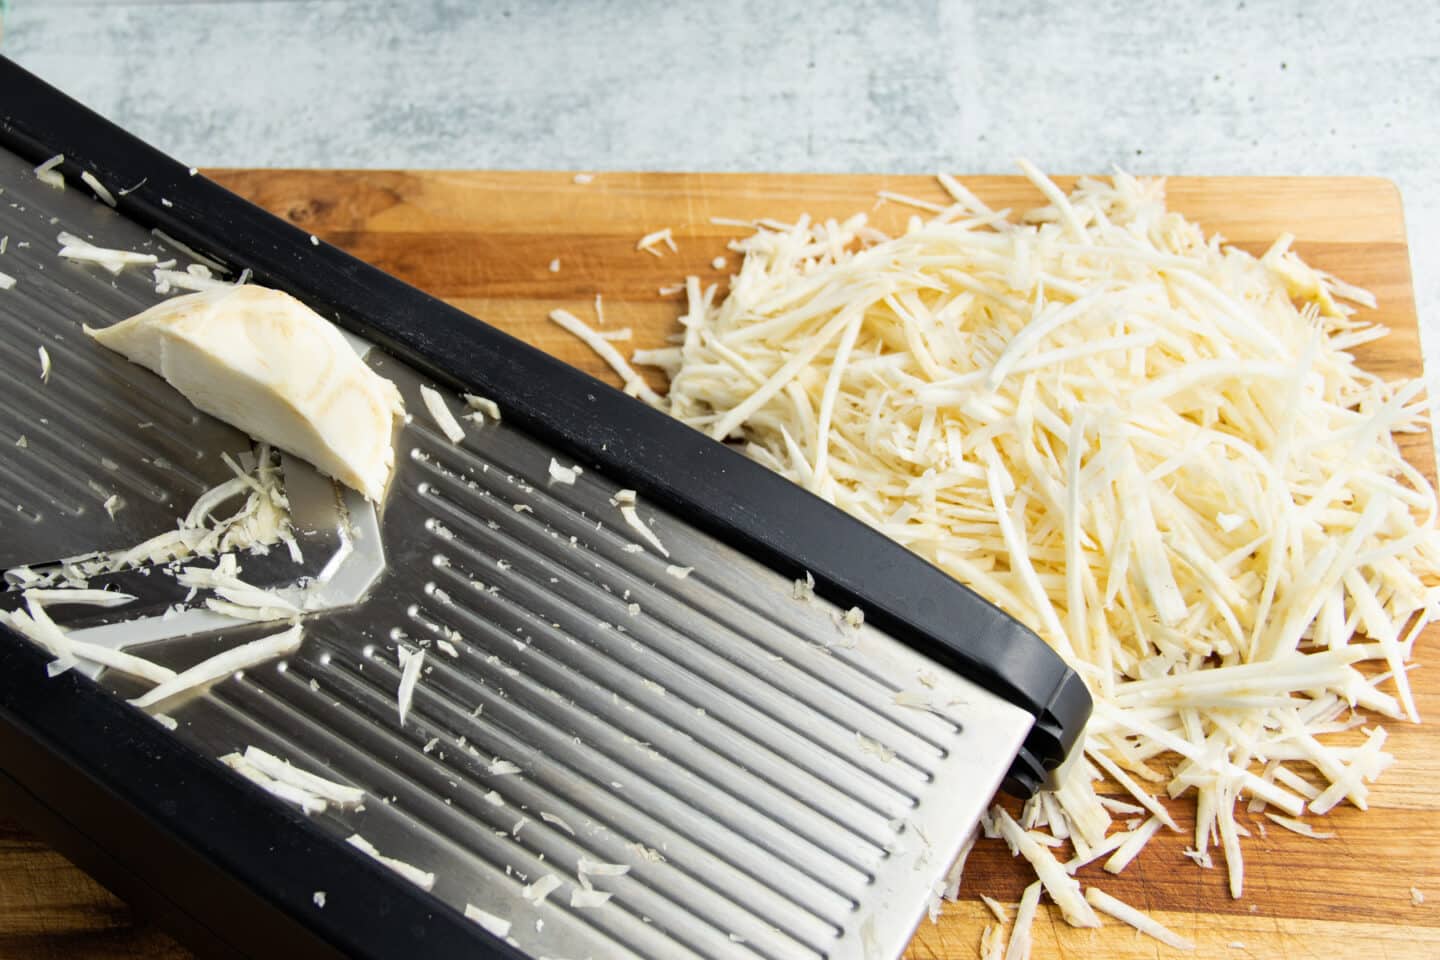 Picture of the celeriac being cut in julienne sticks on the mandoline.